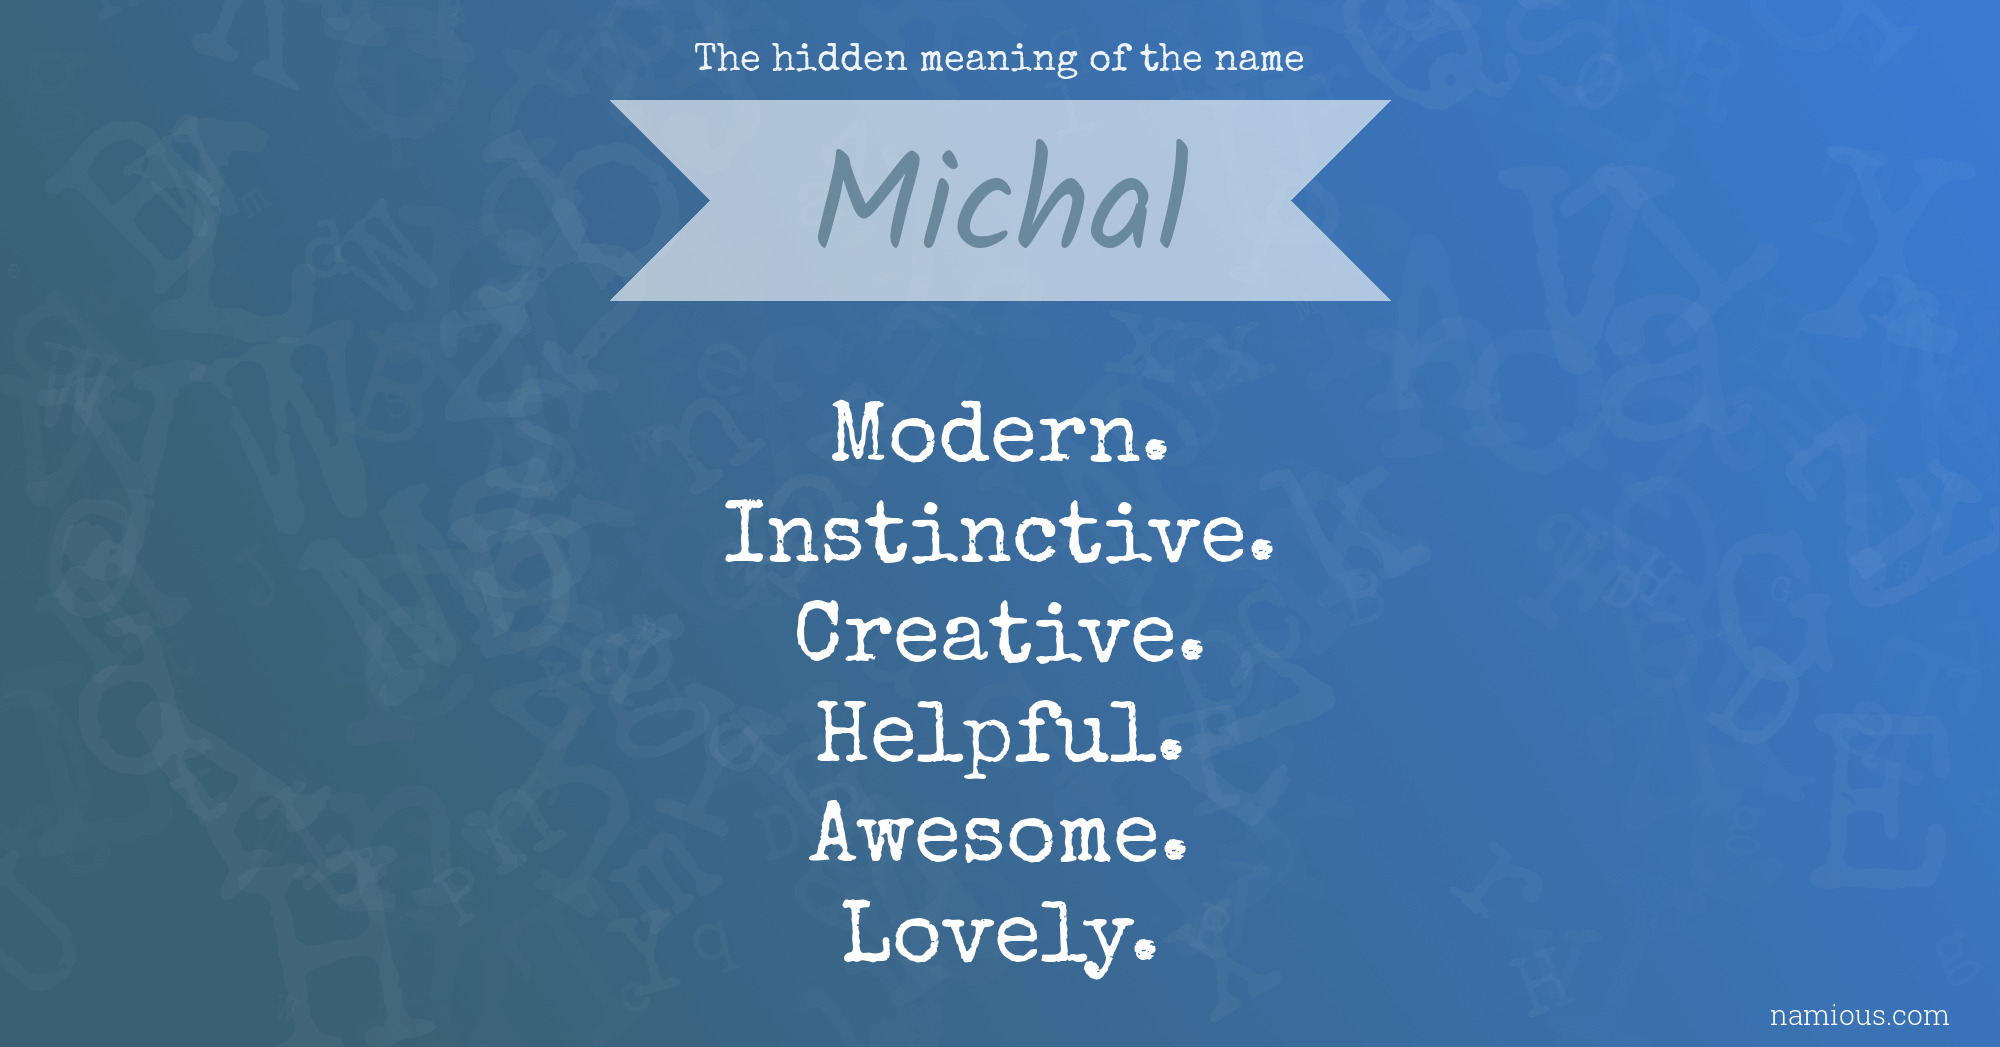 The hidden meaning of the name Michal